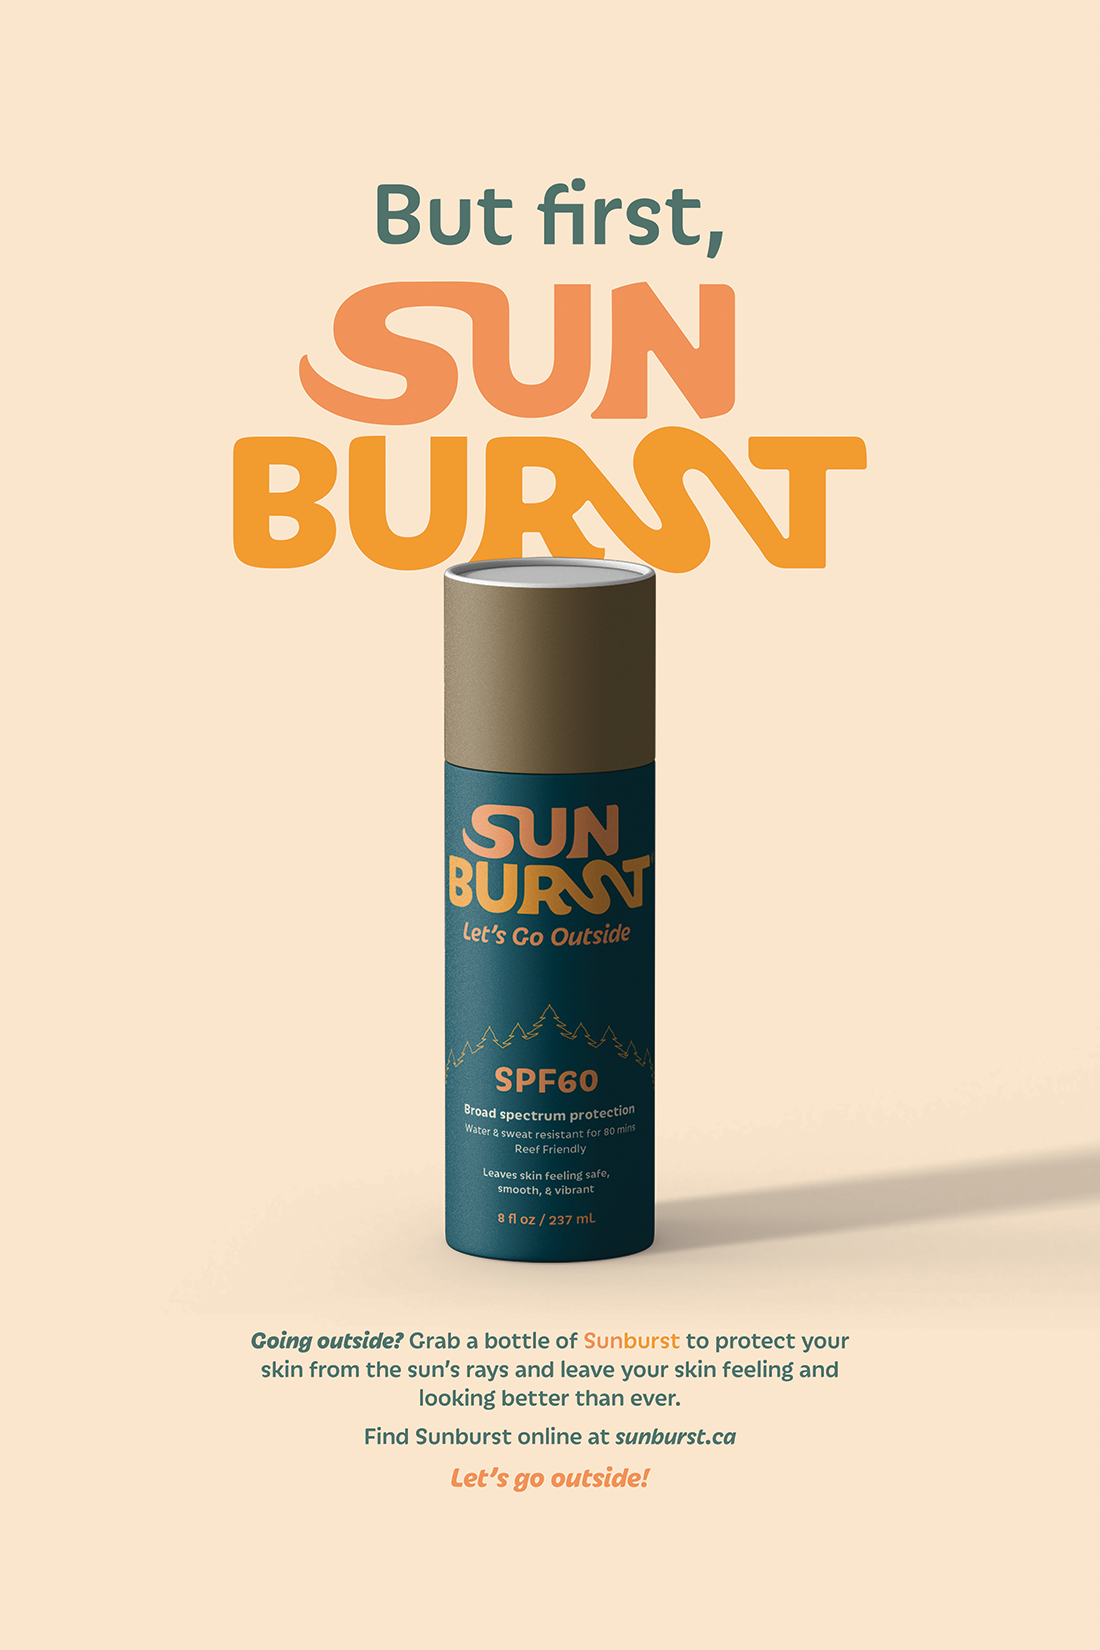 Sunscreen Branding, Packaging, and Advertising - Image 1